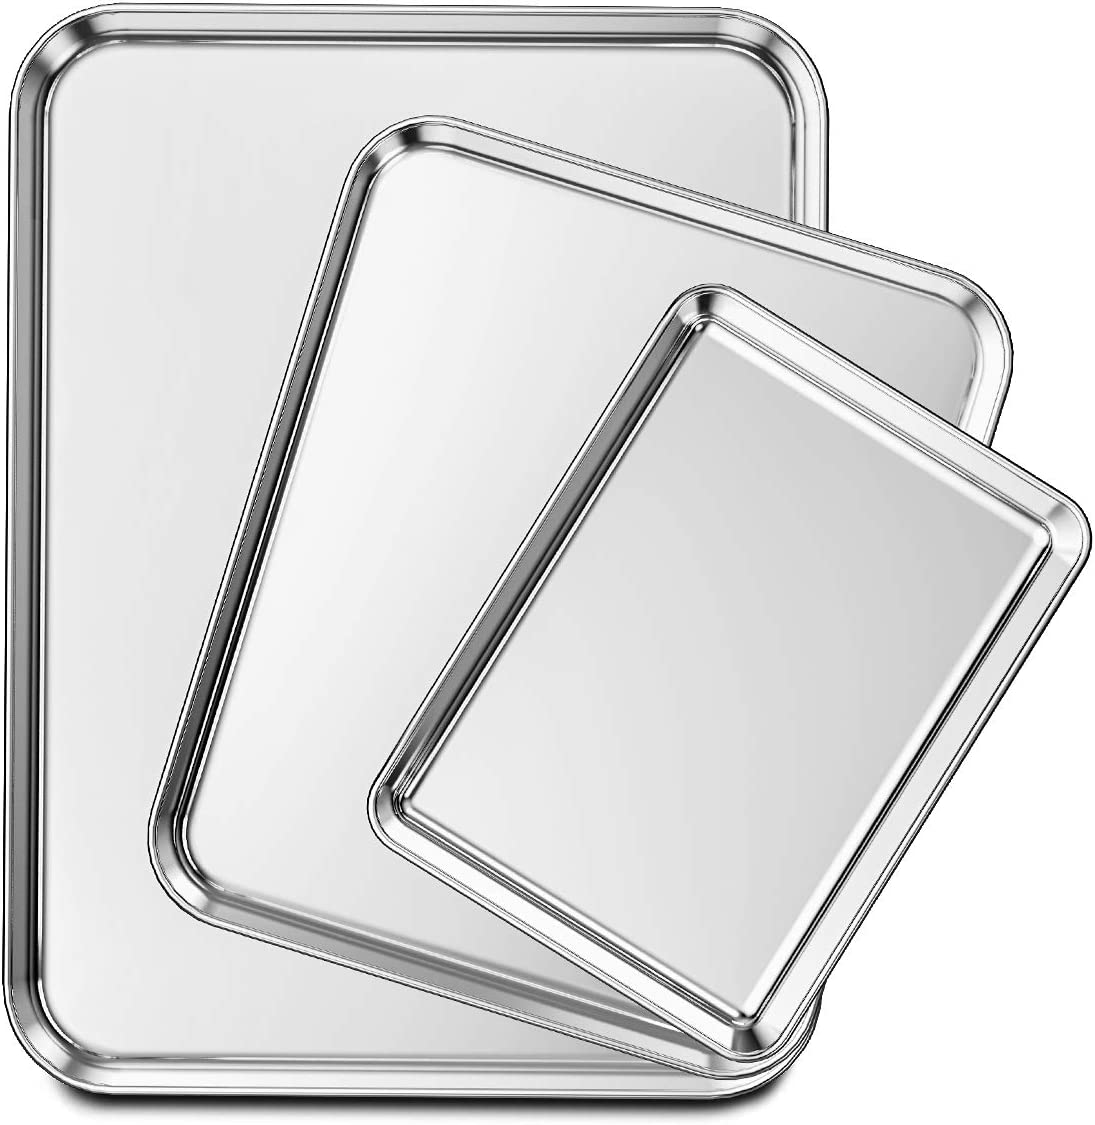 Wildone Assorted Sizes Stainless Steel Sheet Pans, 3-Piece